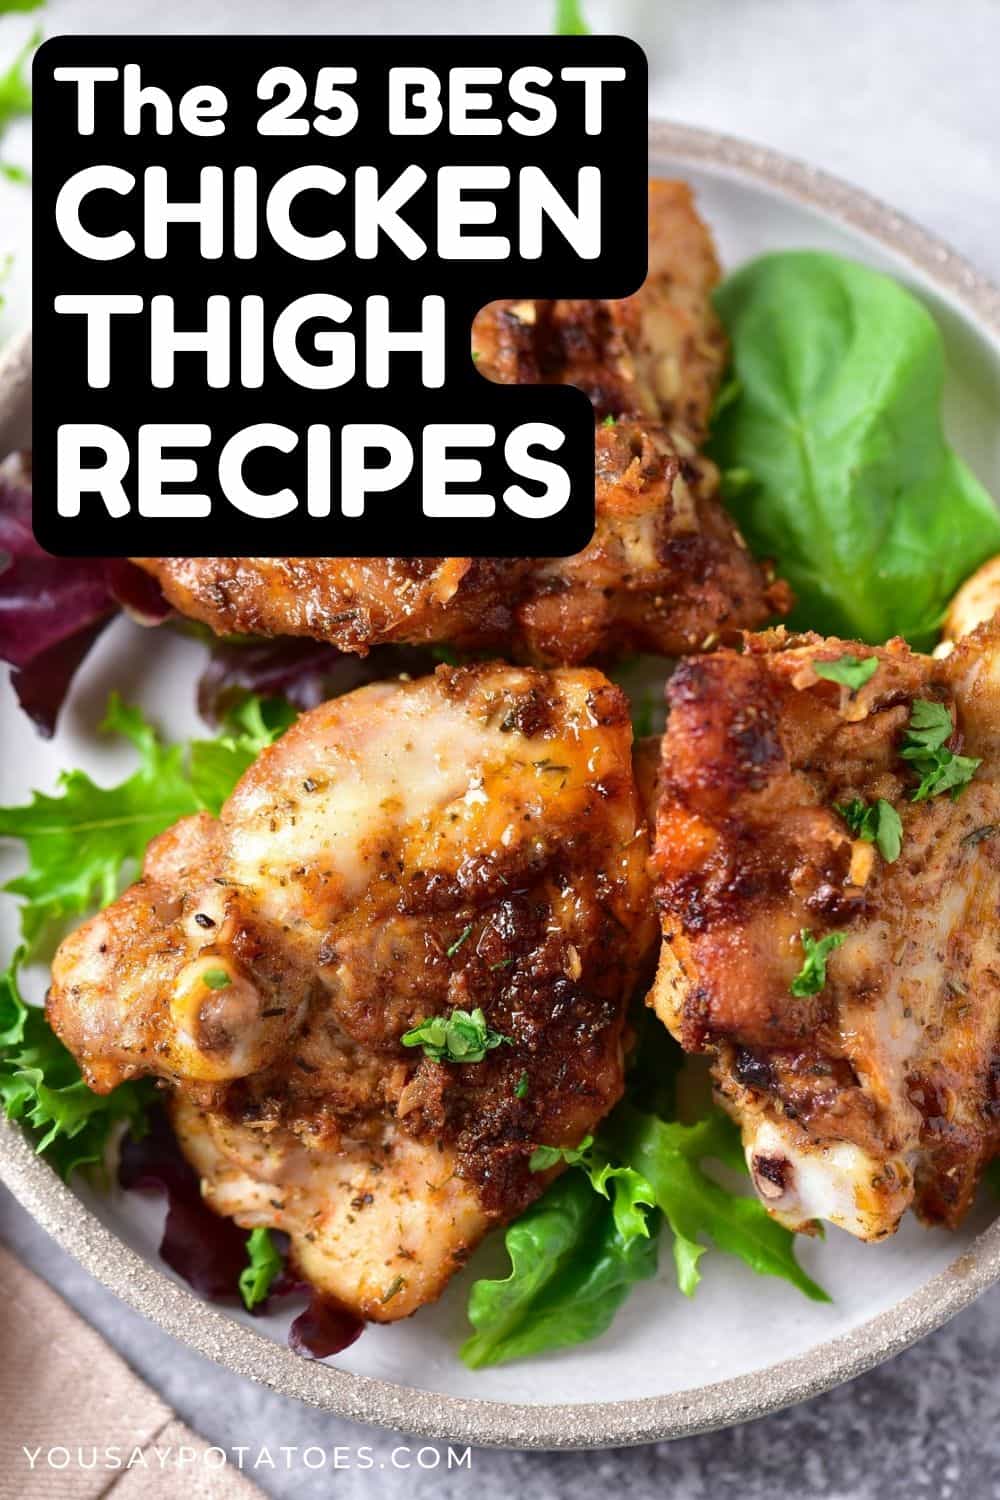 Picture of garlic chicken thighs, with text: The 25 Best Chicken Thigh Recipes.